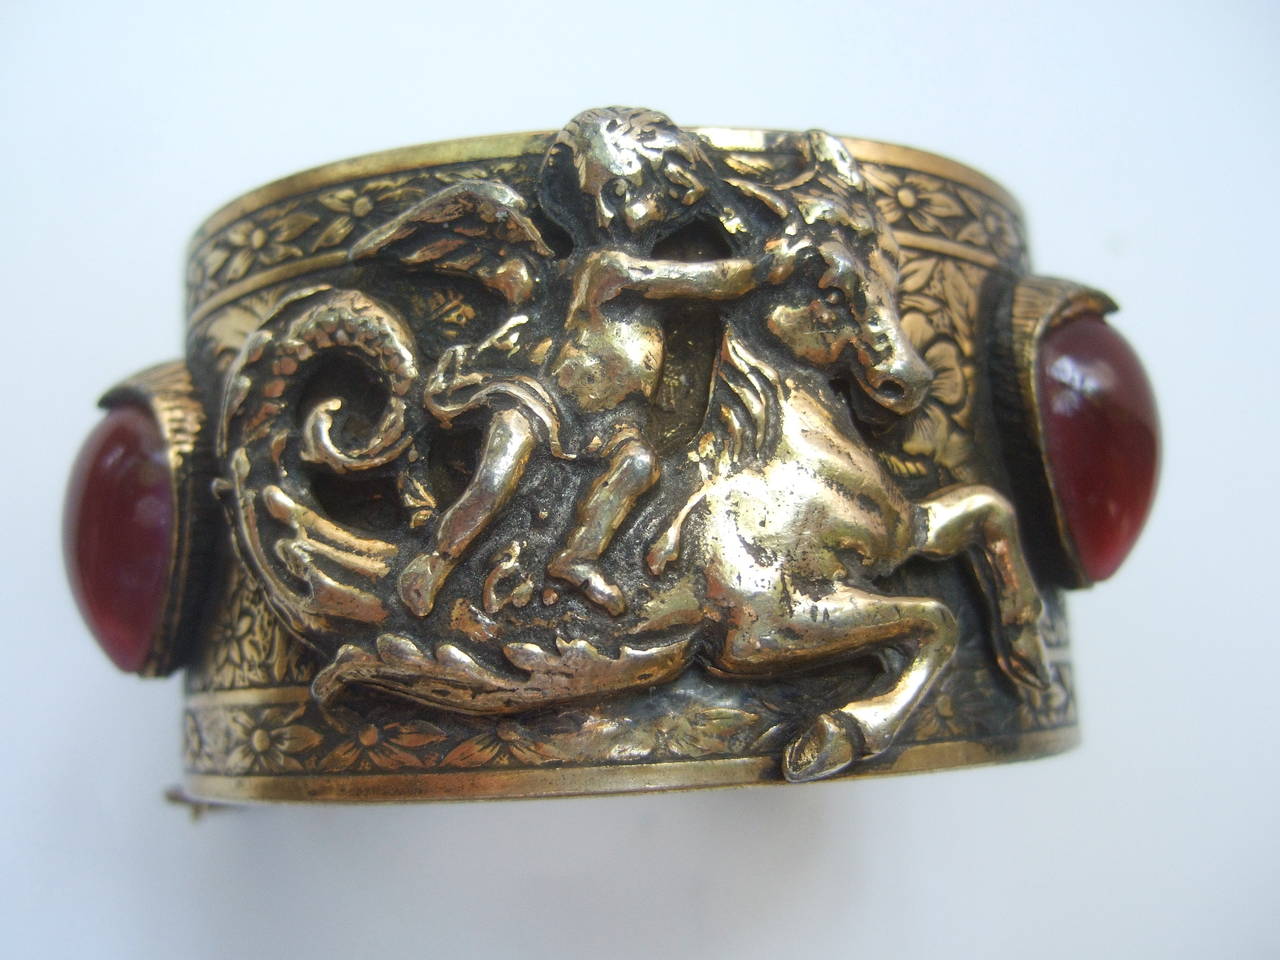 Ornate repousse gilt metal cherub cuff bracelet c 1970
The wide gilt metal cuff is adorned with a cherub 
figure riding on top of a mythical pegasus horse  

The wide gilt metal cuff is embellished with two deep
burgundy red glass streaked oval